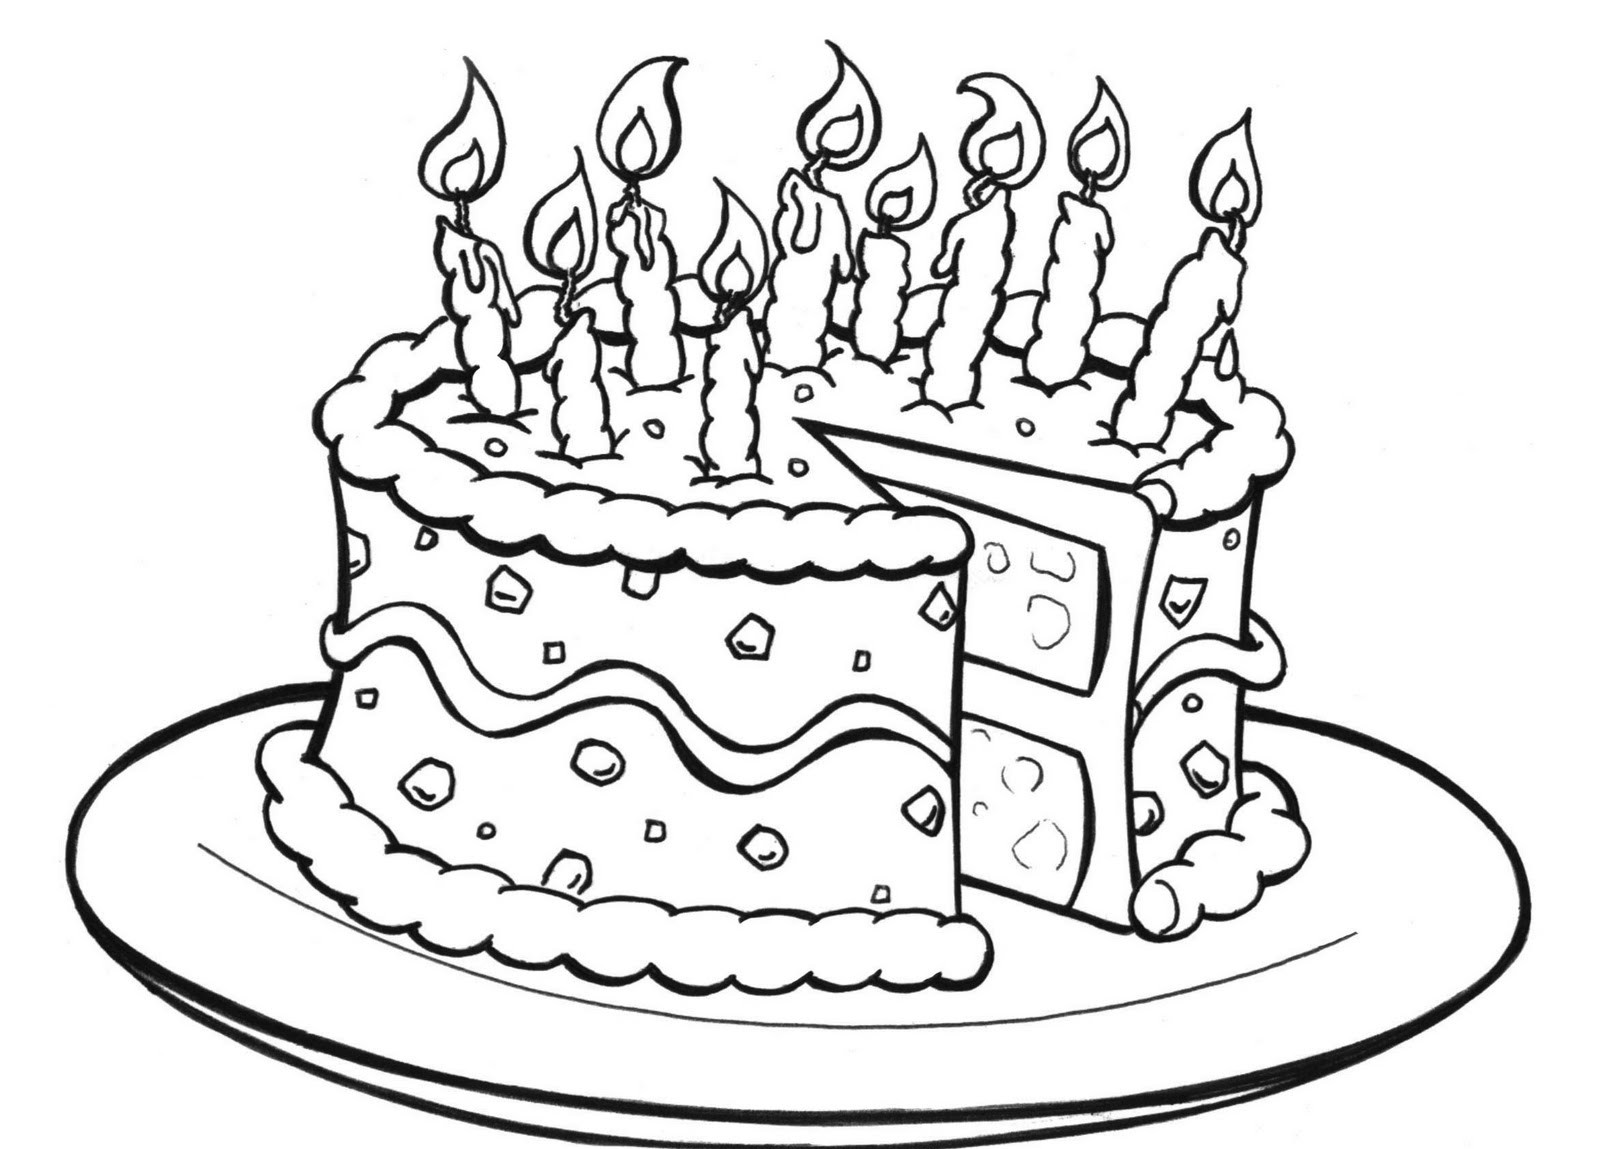 Little Girl with Birthday Cake Coloring Page | Print it Free